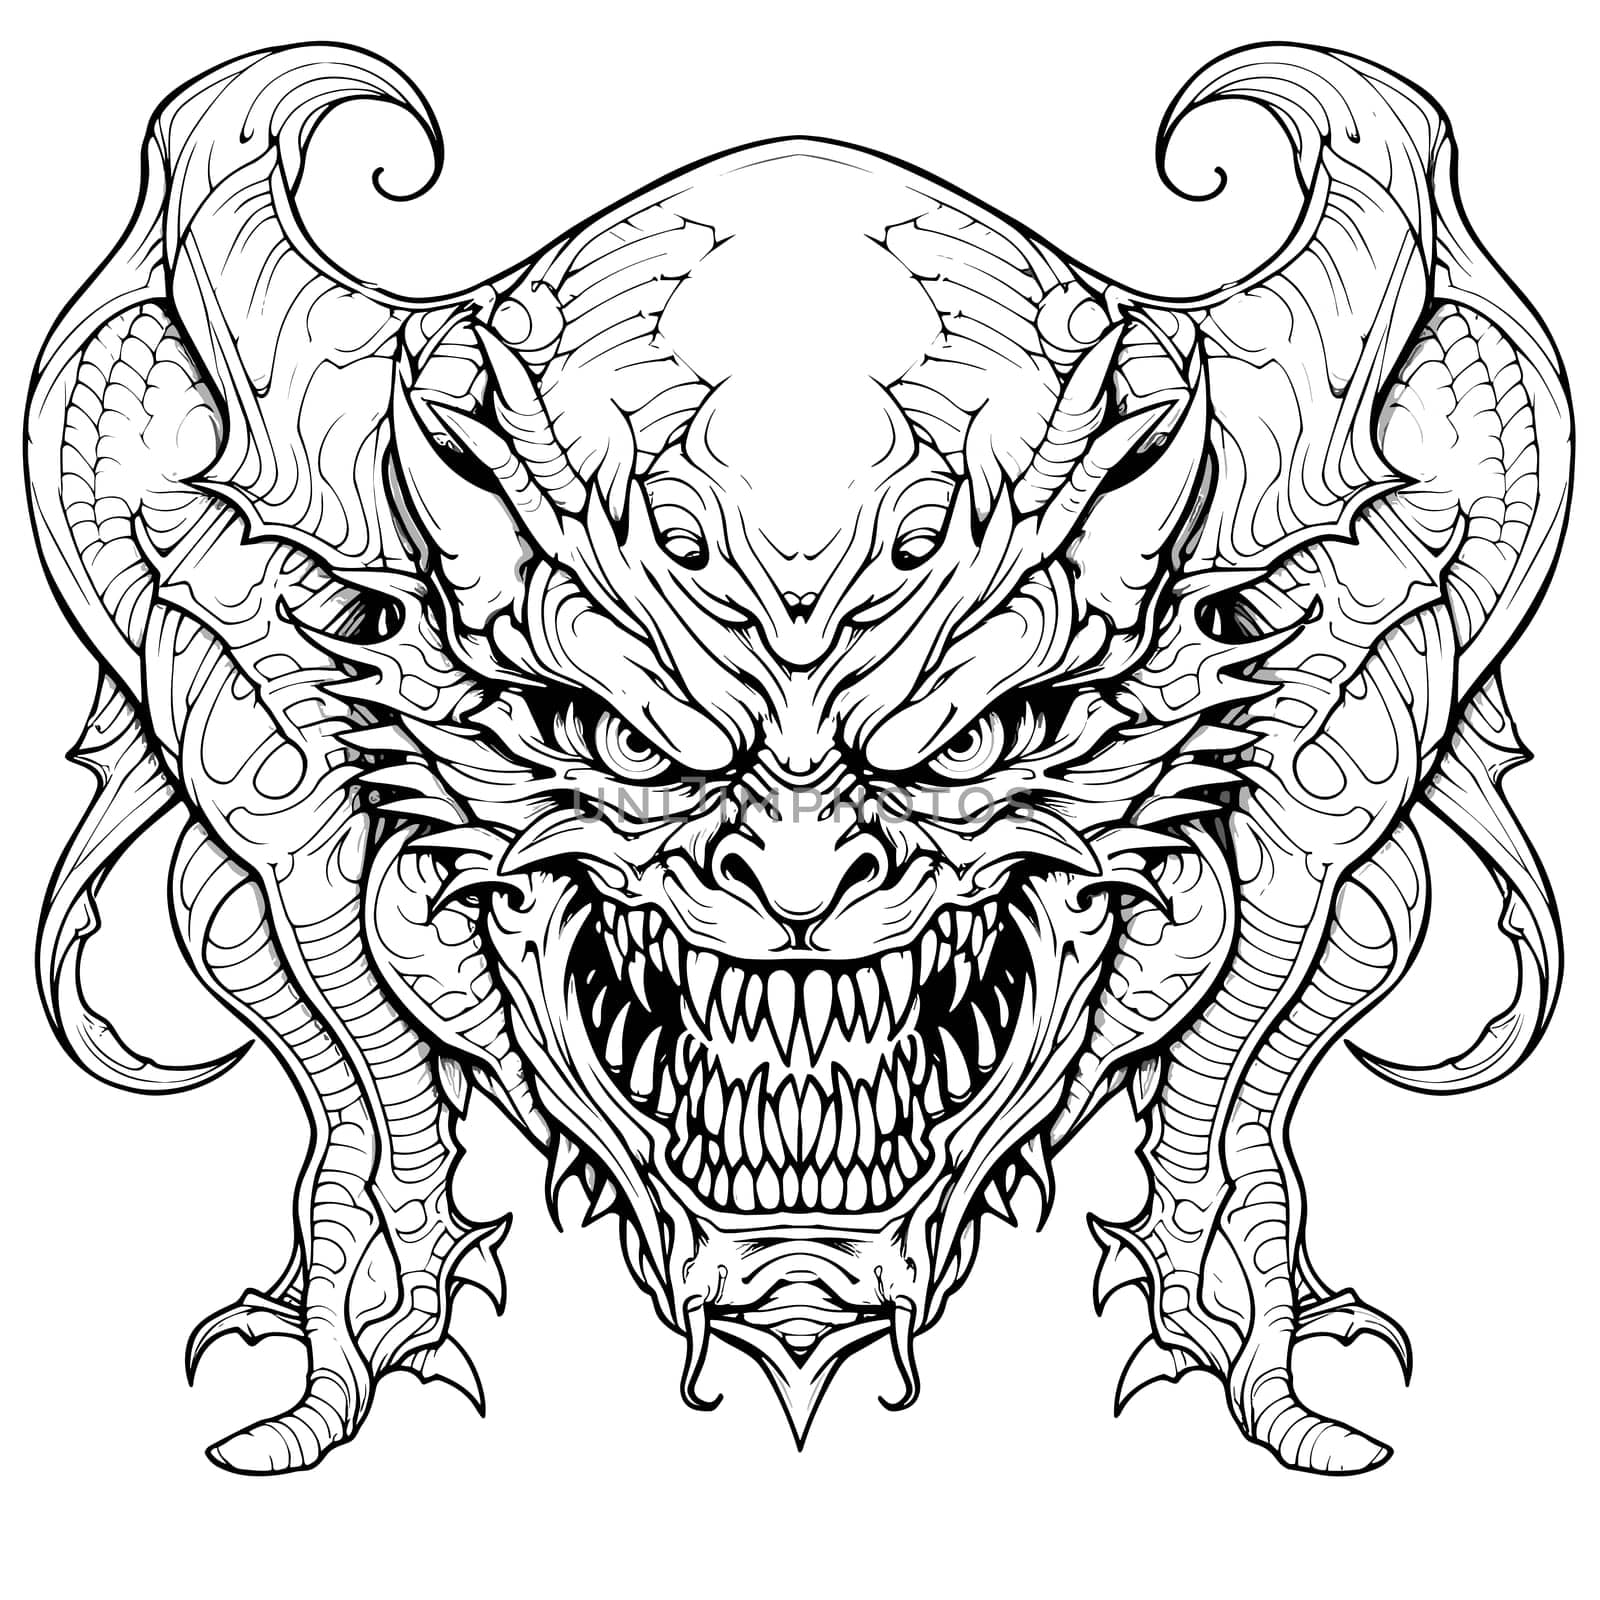 Terrible mythical monster of nightmares in vector art style. by palinchak